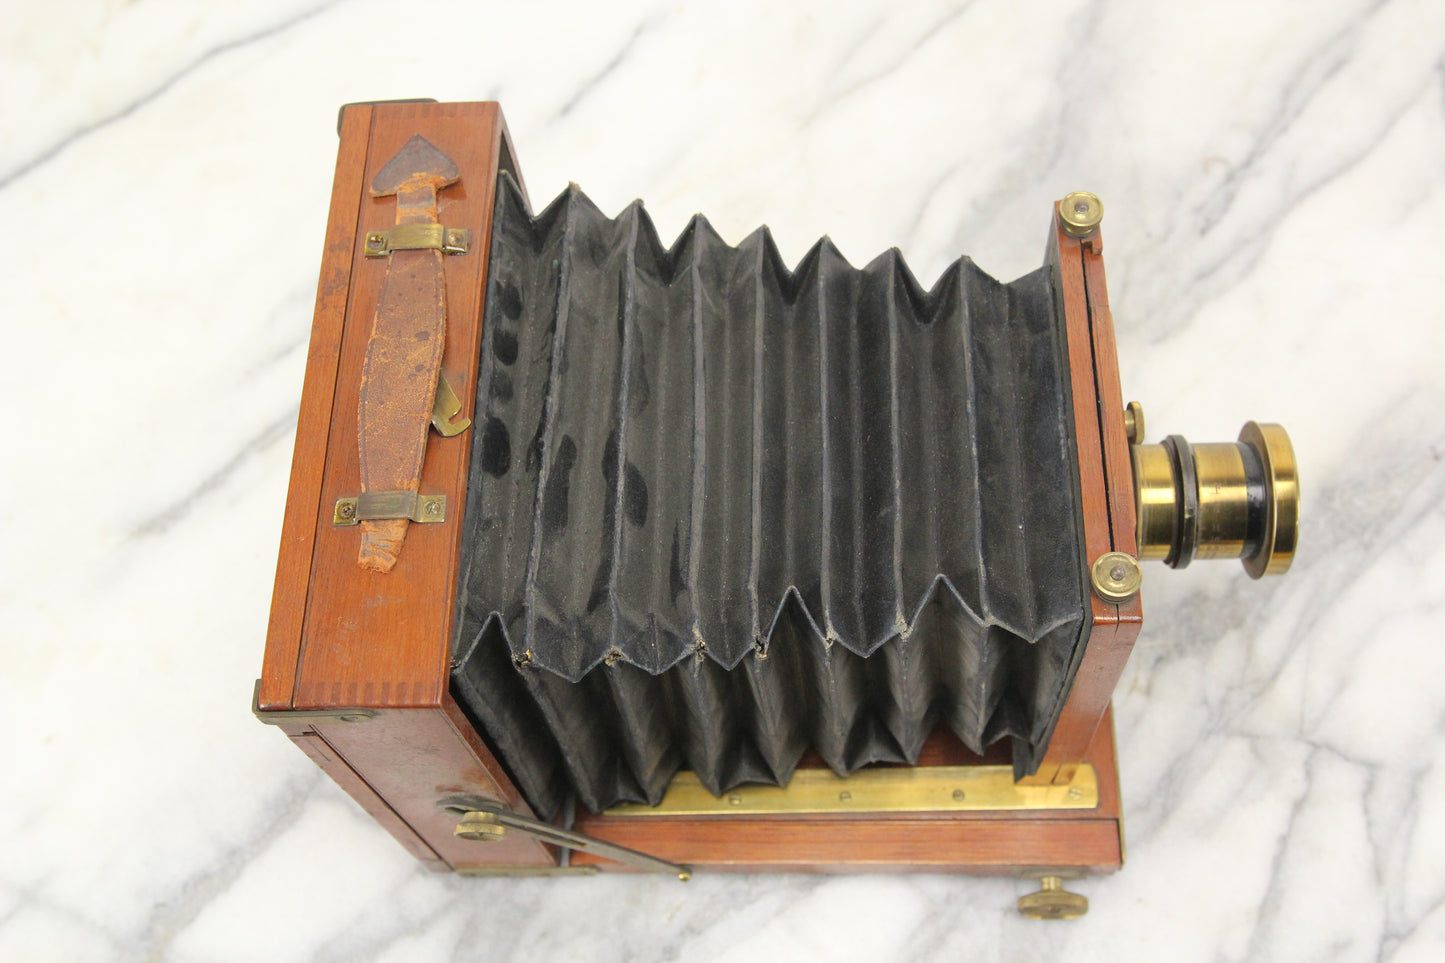 Antique Unmarked Half Plate Dry Plate Wooden Camera with f/8 Lens